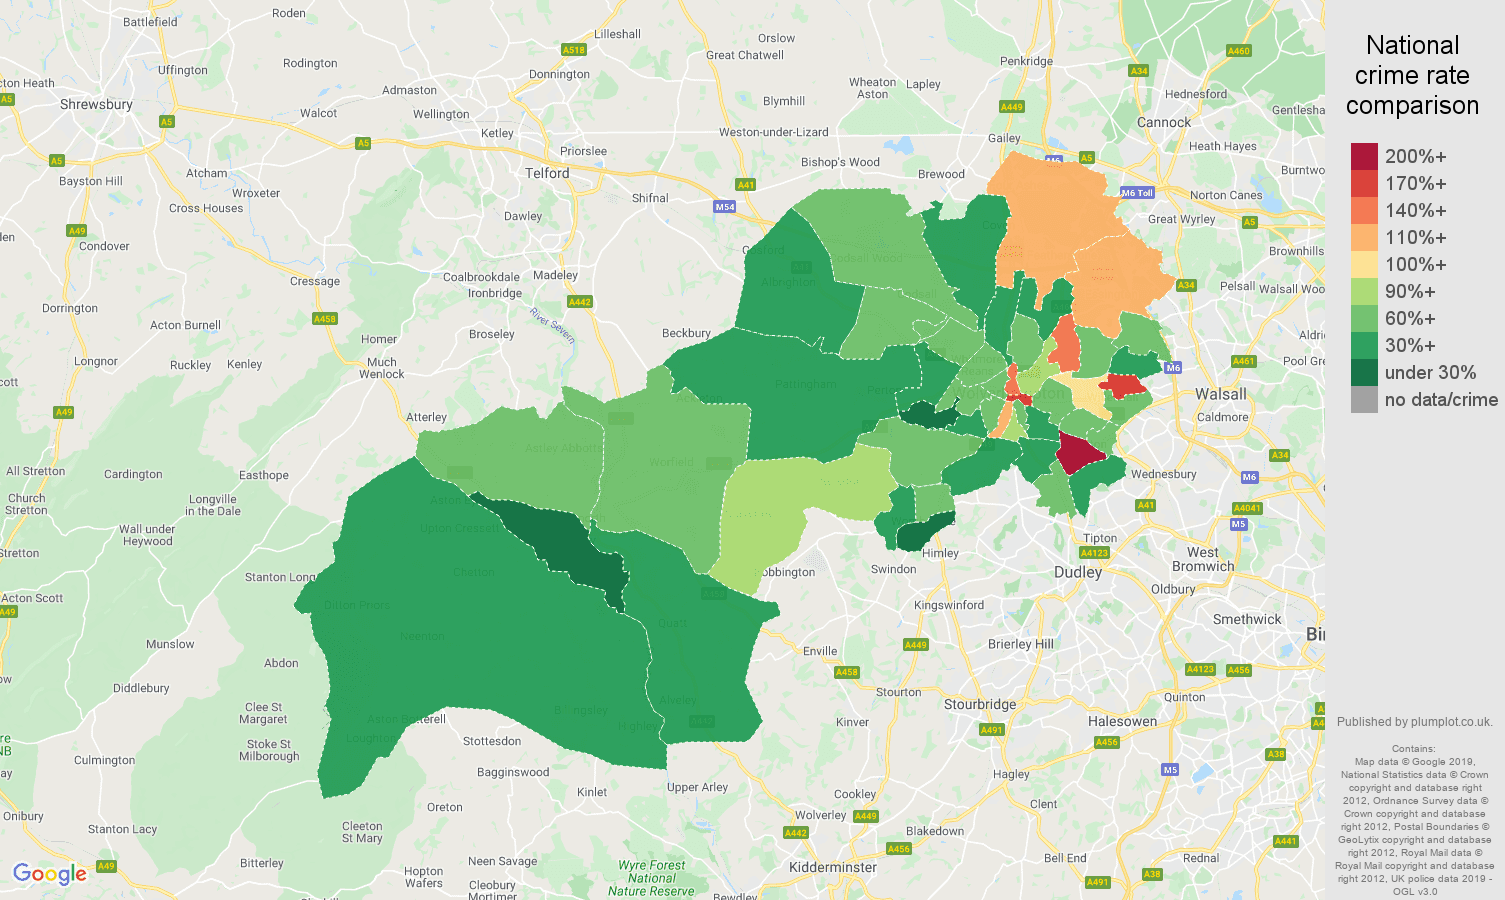 Wolverhampton other theft crime rate comparison map